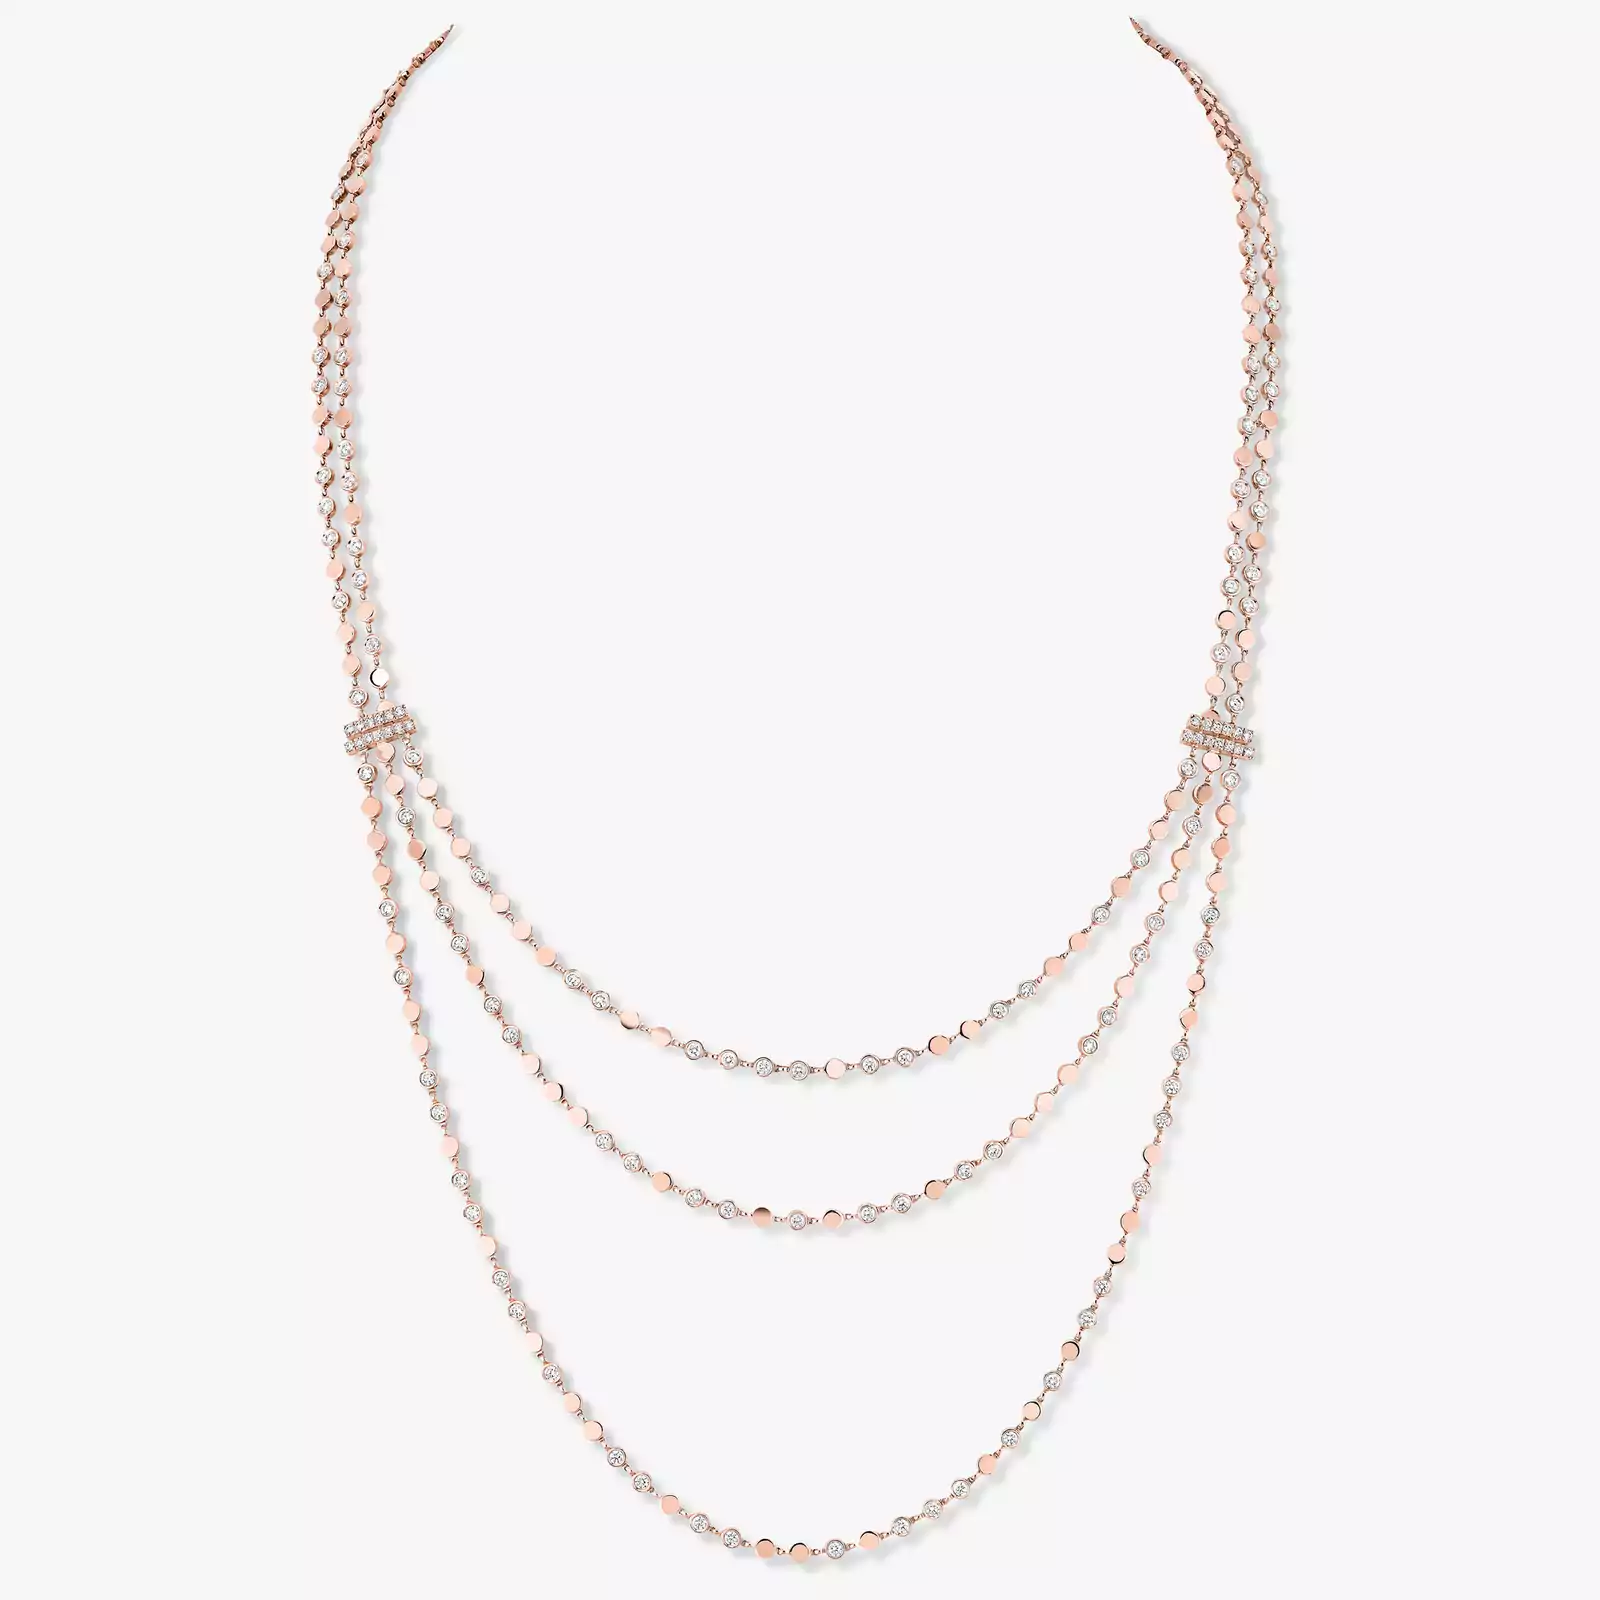 D-Vibes Multi-Row Long Necklace Pink Gold For Her Diamond Necklace 12435-PG